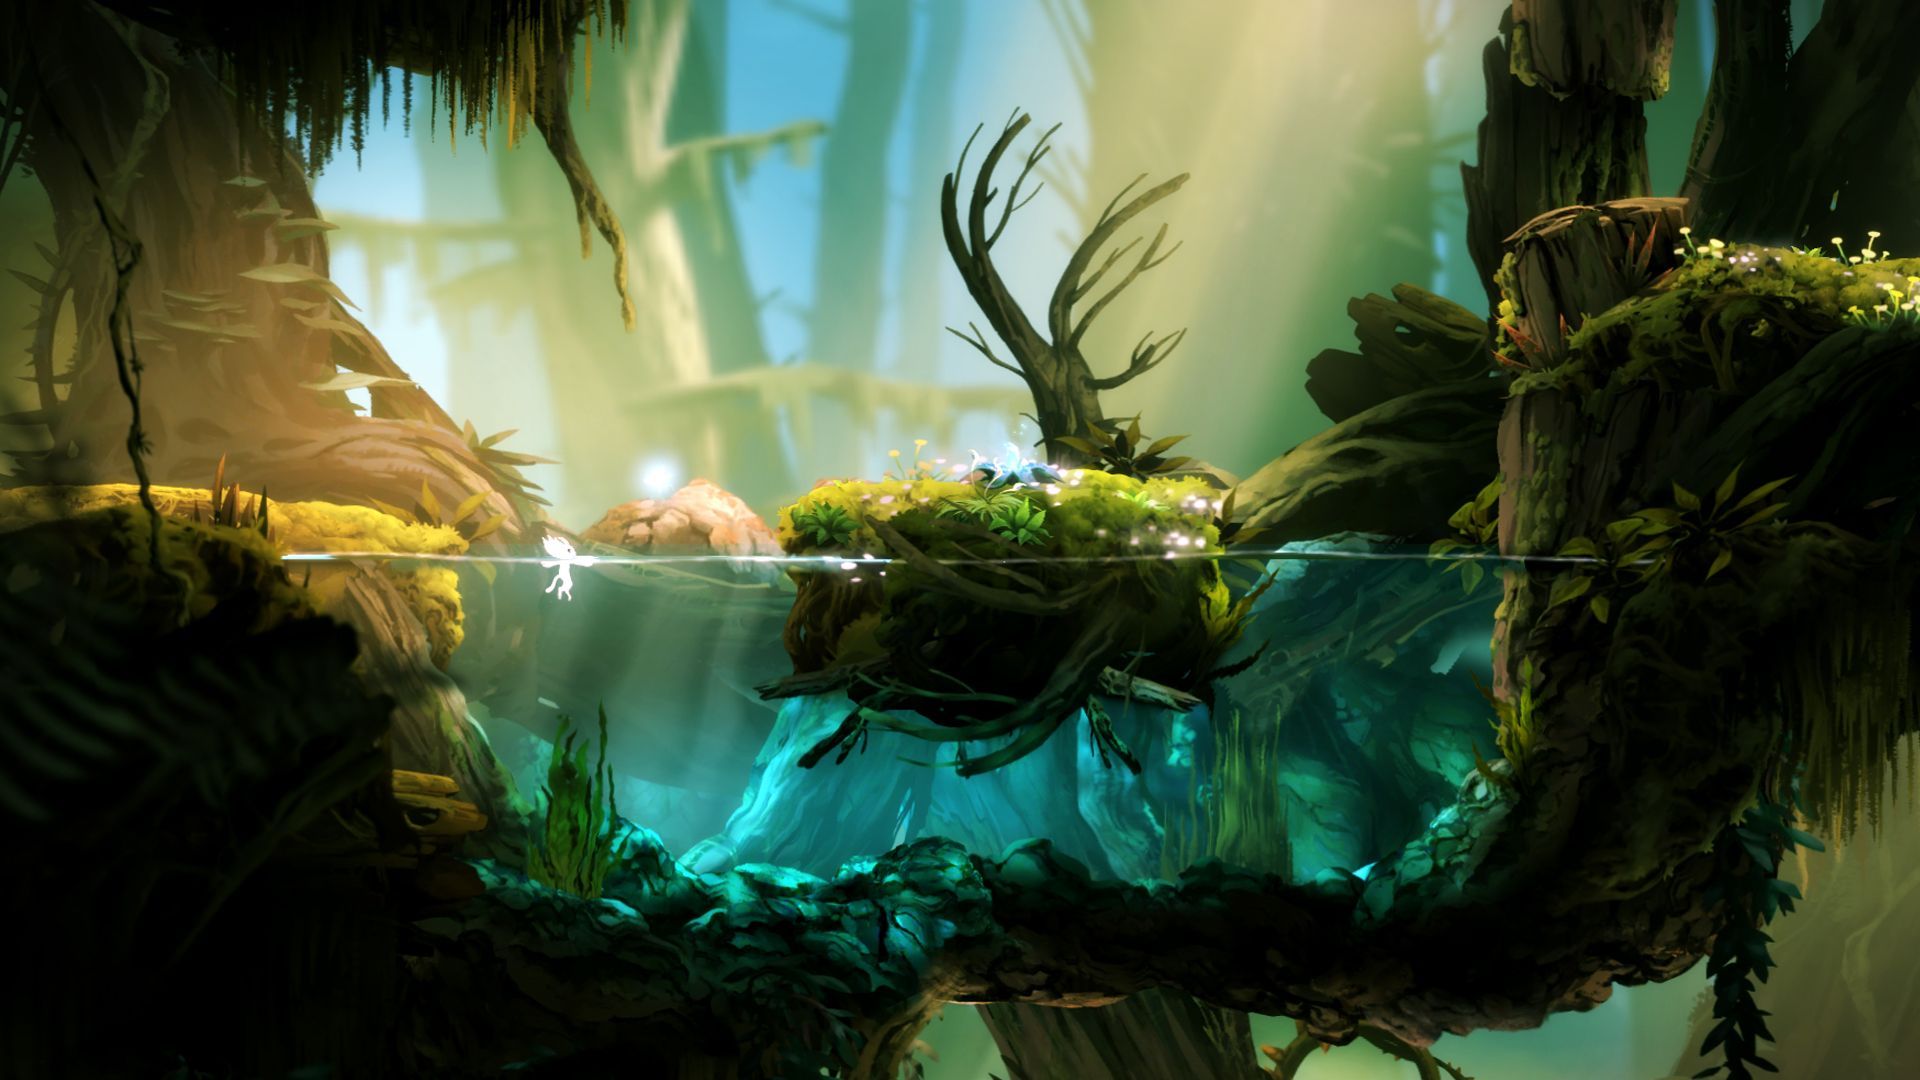 Ori and the Blind Forest Wallpaper. Forest games, Environment concept art, Forest wallpaper